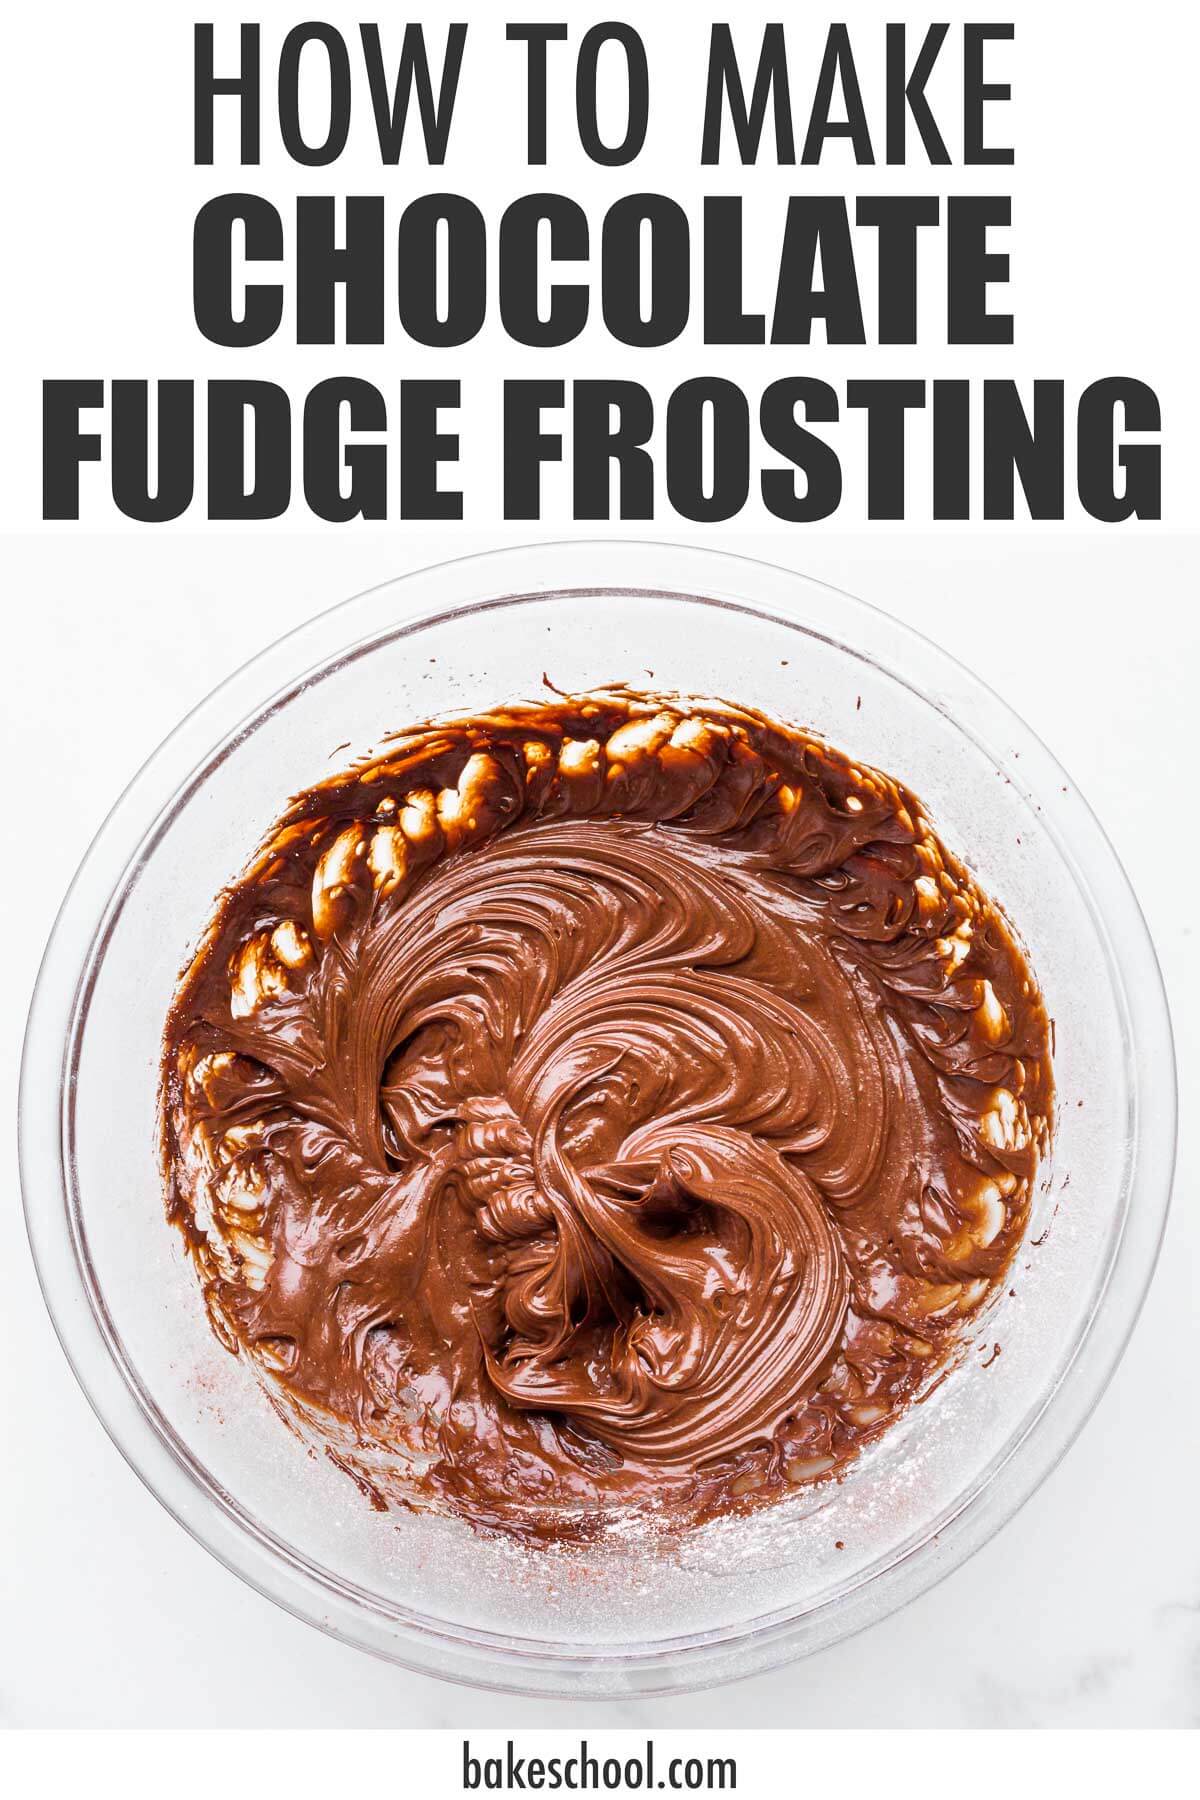 A glass bowl of glossy chocolate fudge frosting featuring text overlay that says "How to make chocolate fudge frosting".